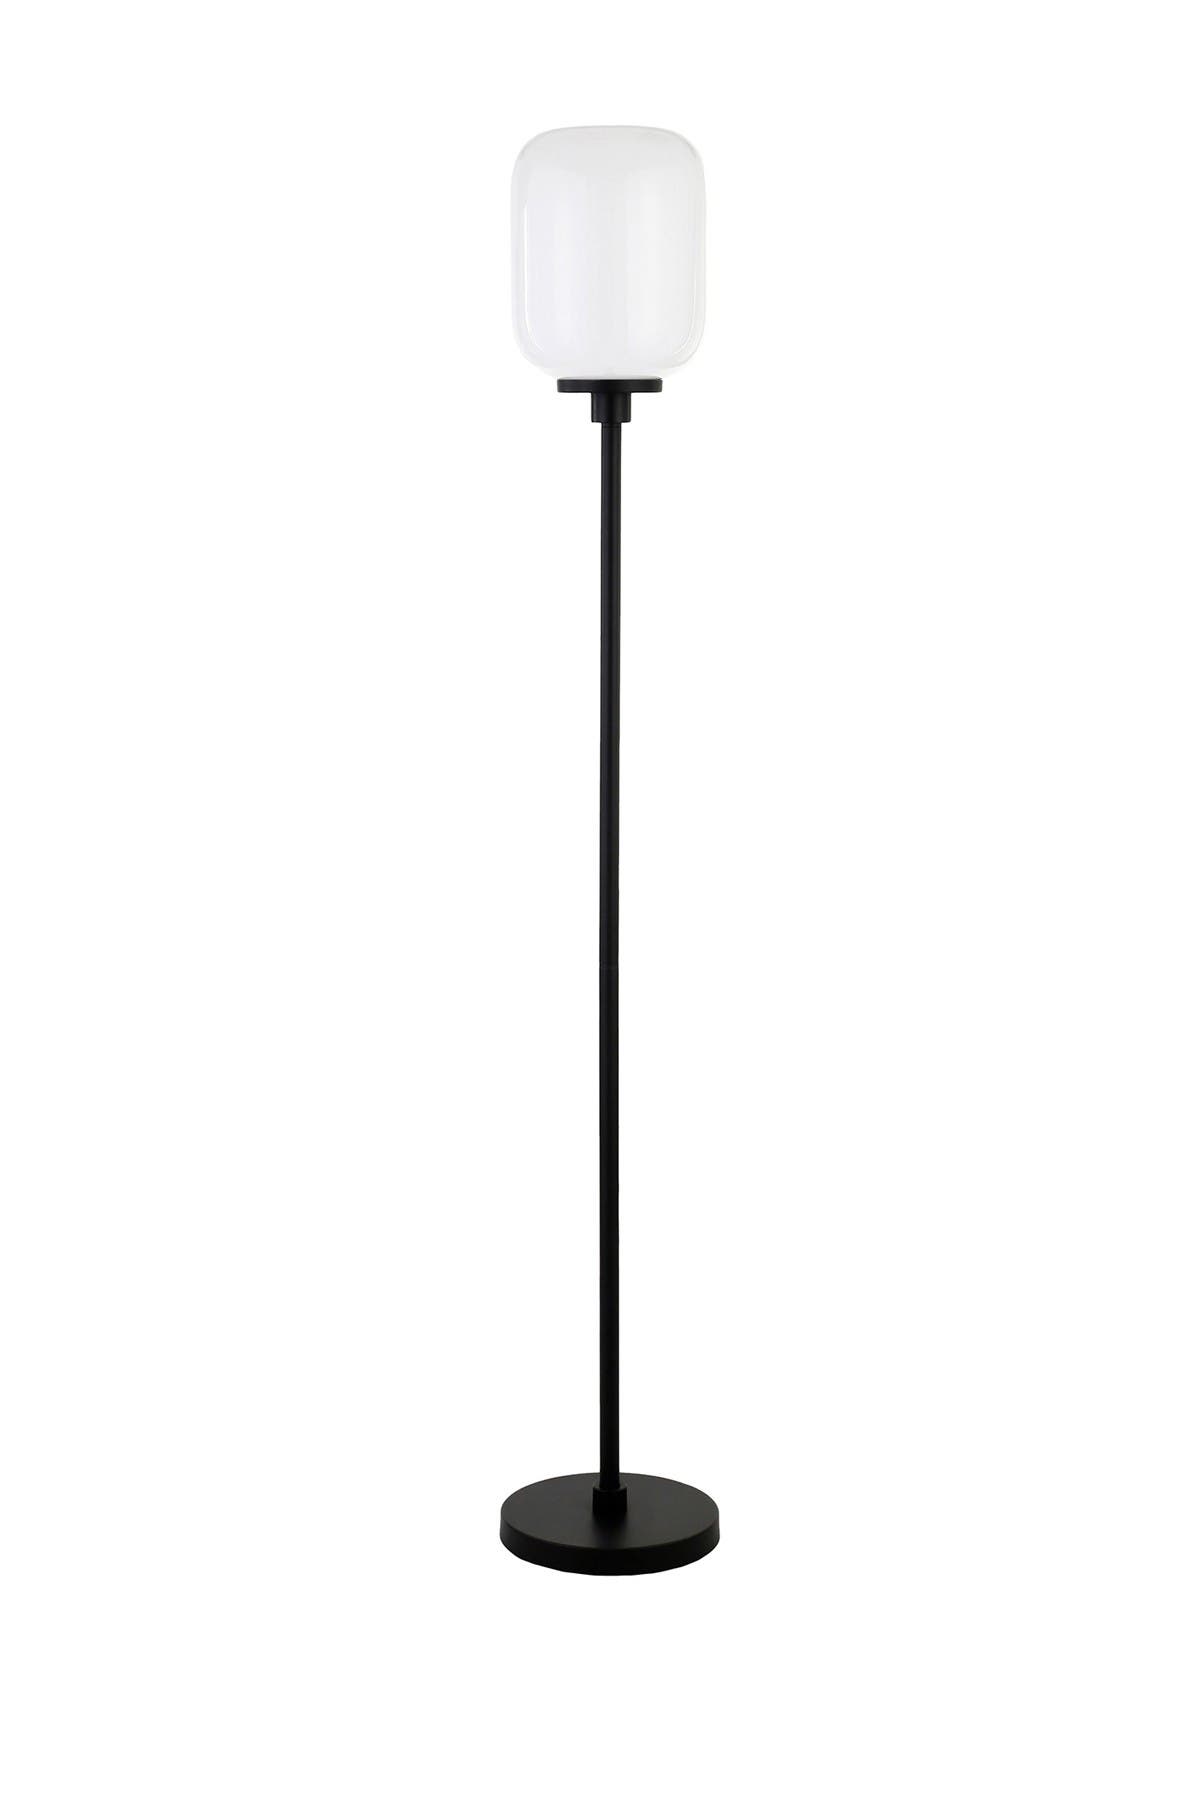 Addison And Lane Agnolo Blackened Bronze Floor Lamp With White Milk Glass Shade